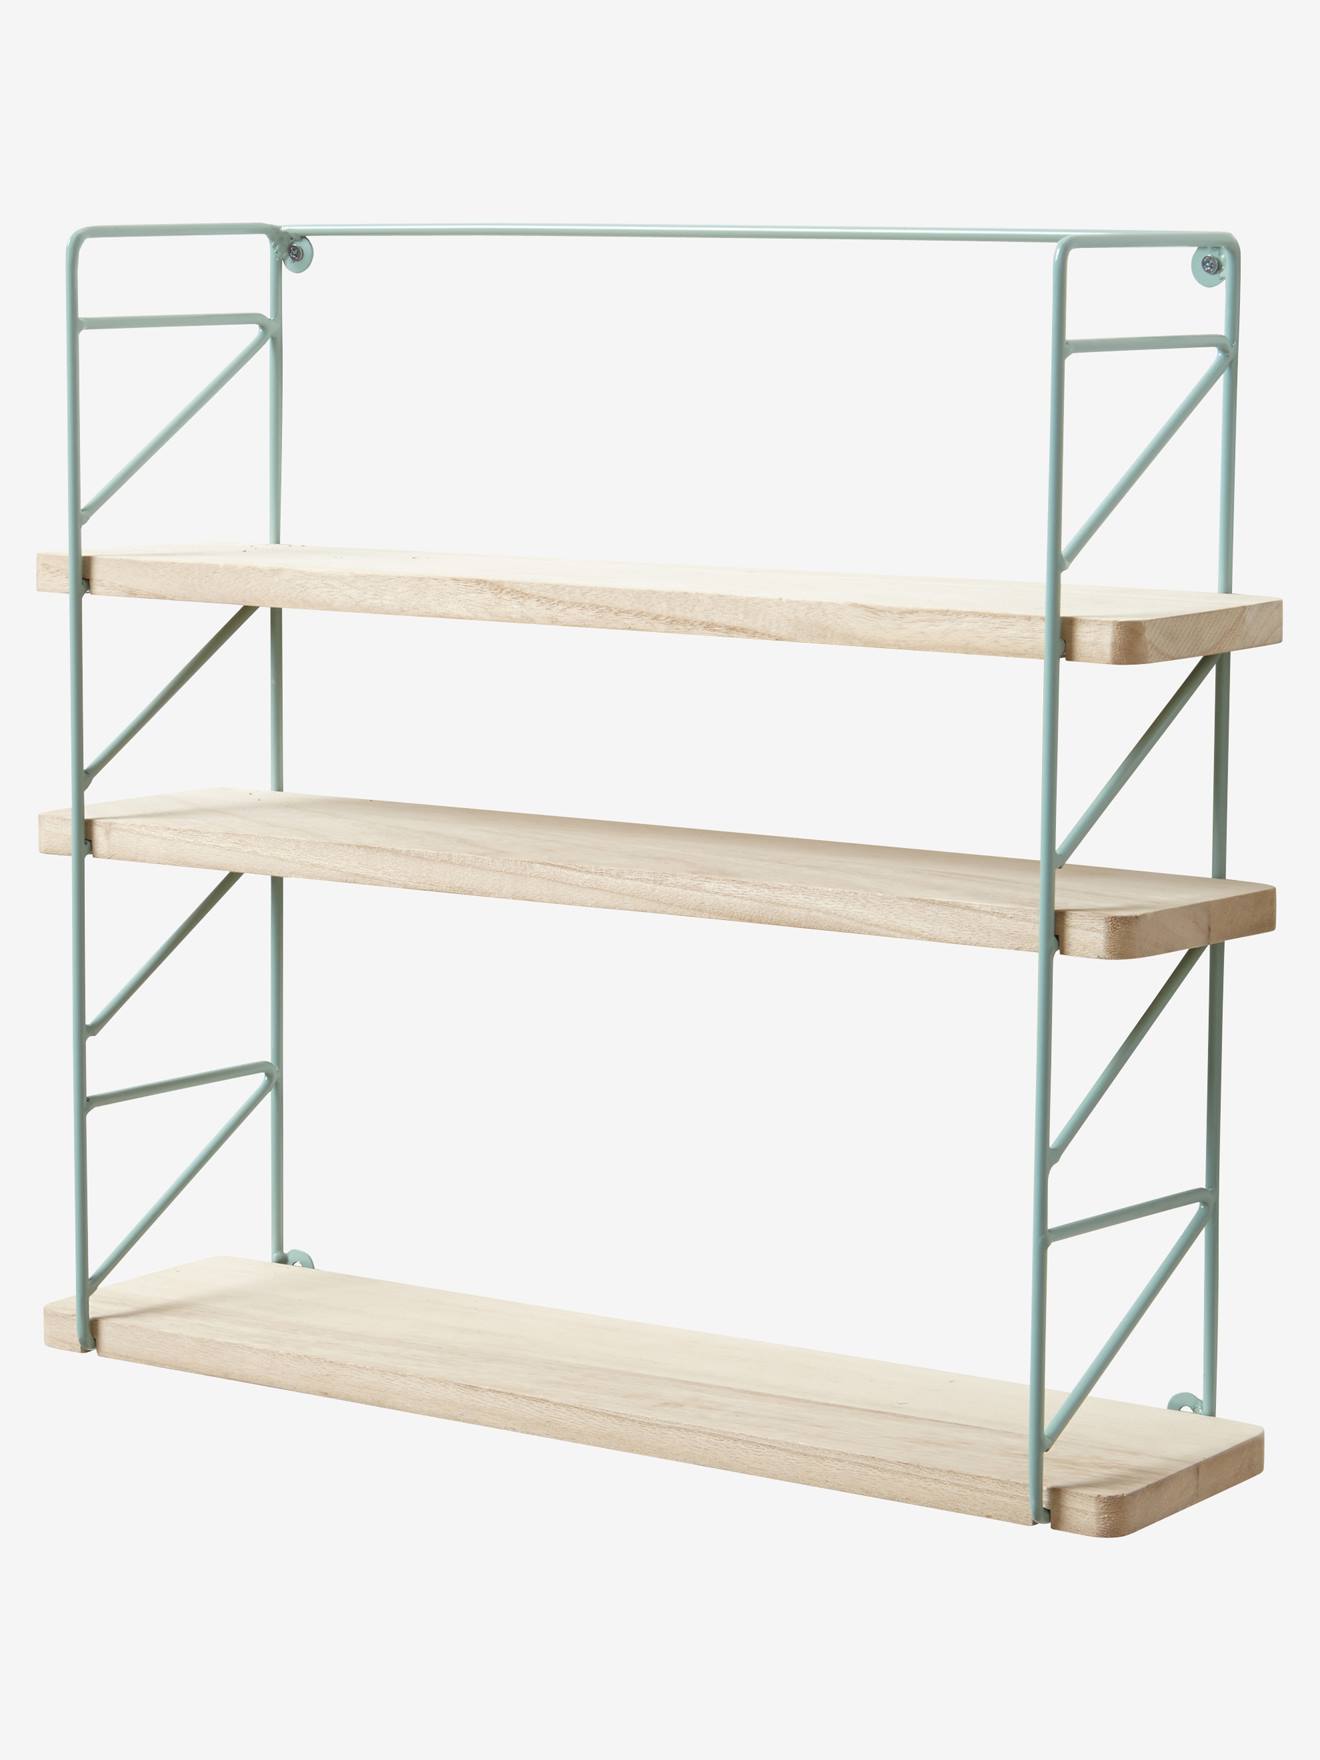 Metal Wood 3 Level Shelving System, Steel And Wood Shelves